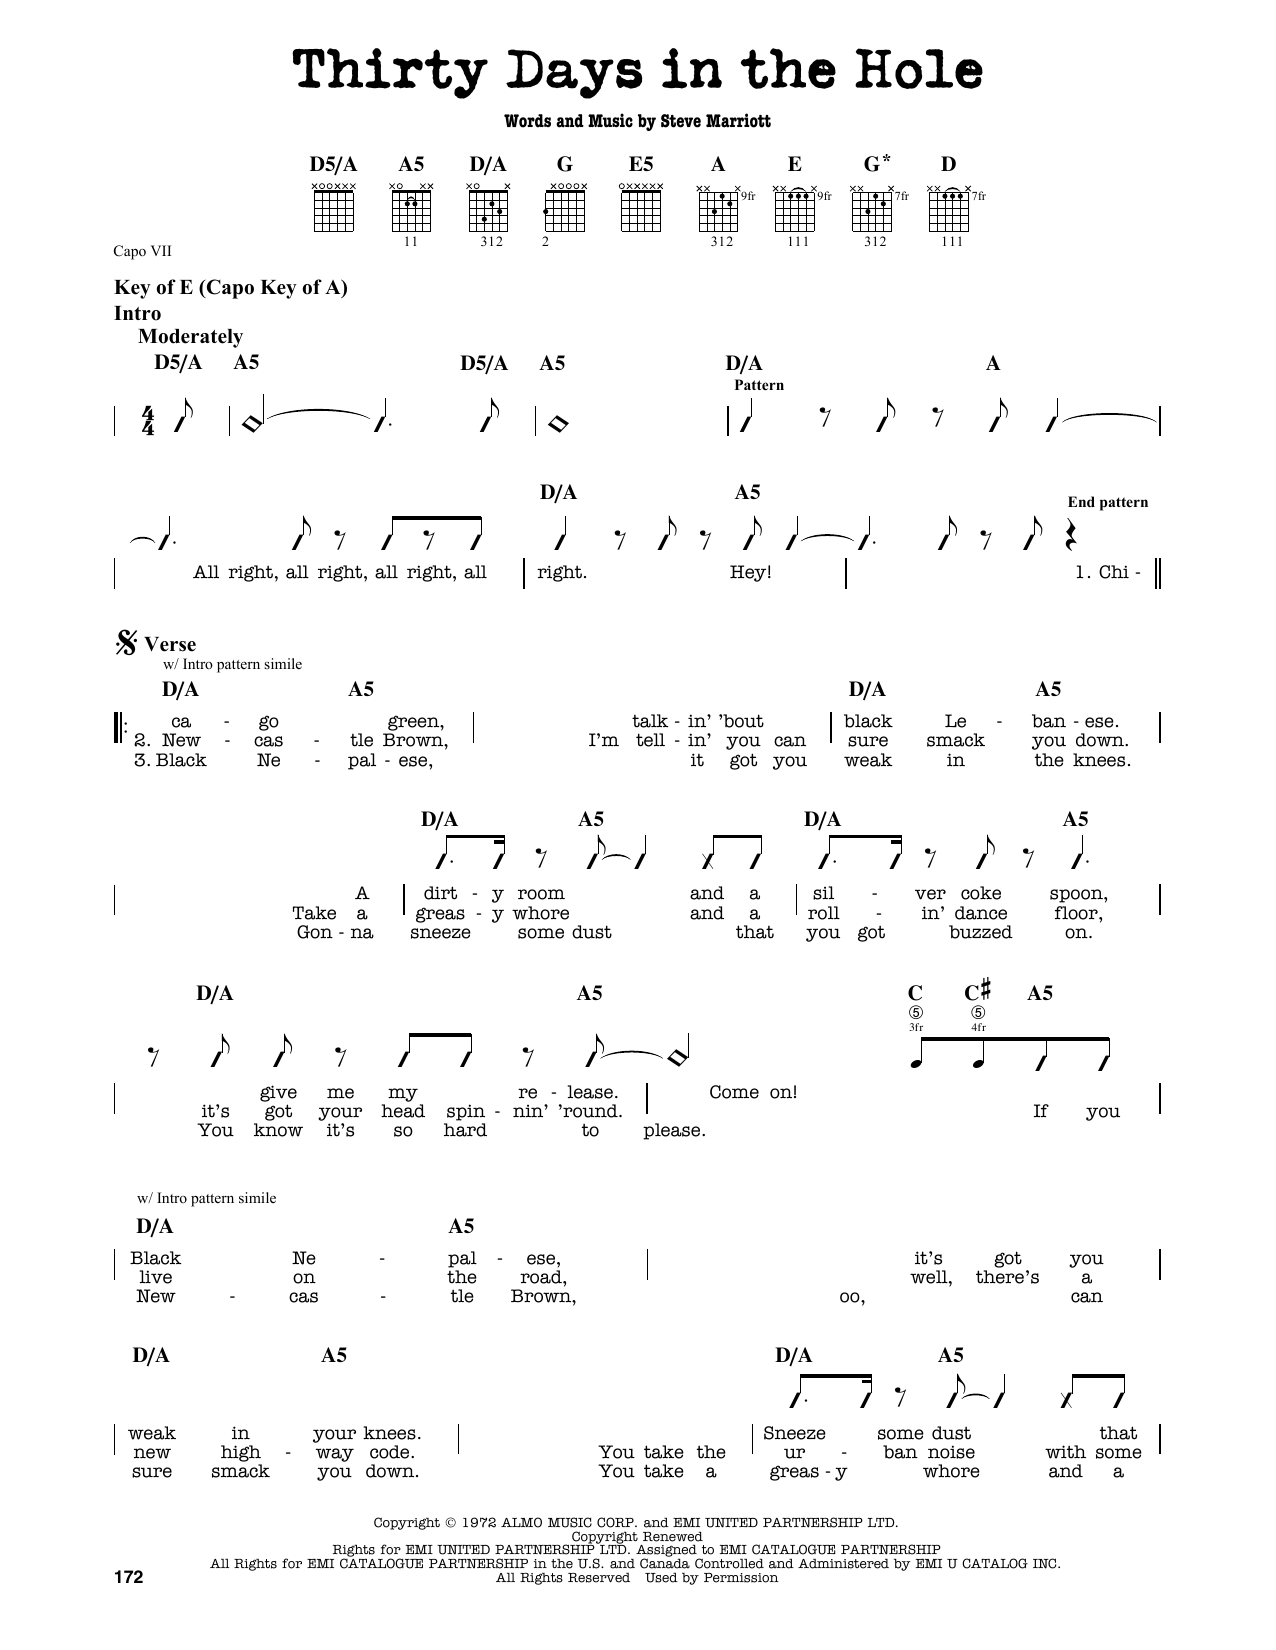 Download Humble Pie Thirty Days In The Hole Sheet Music